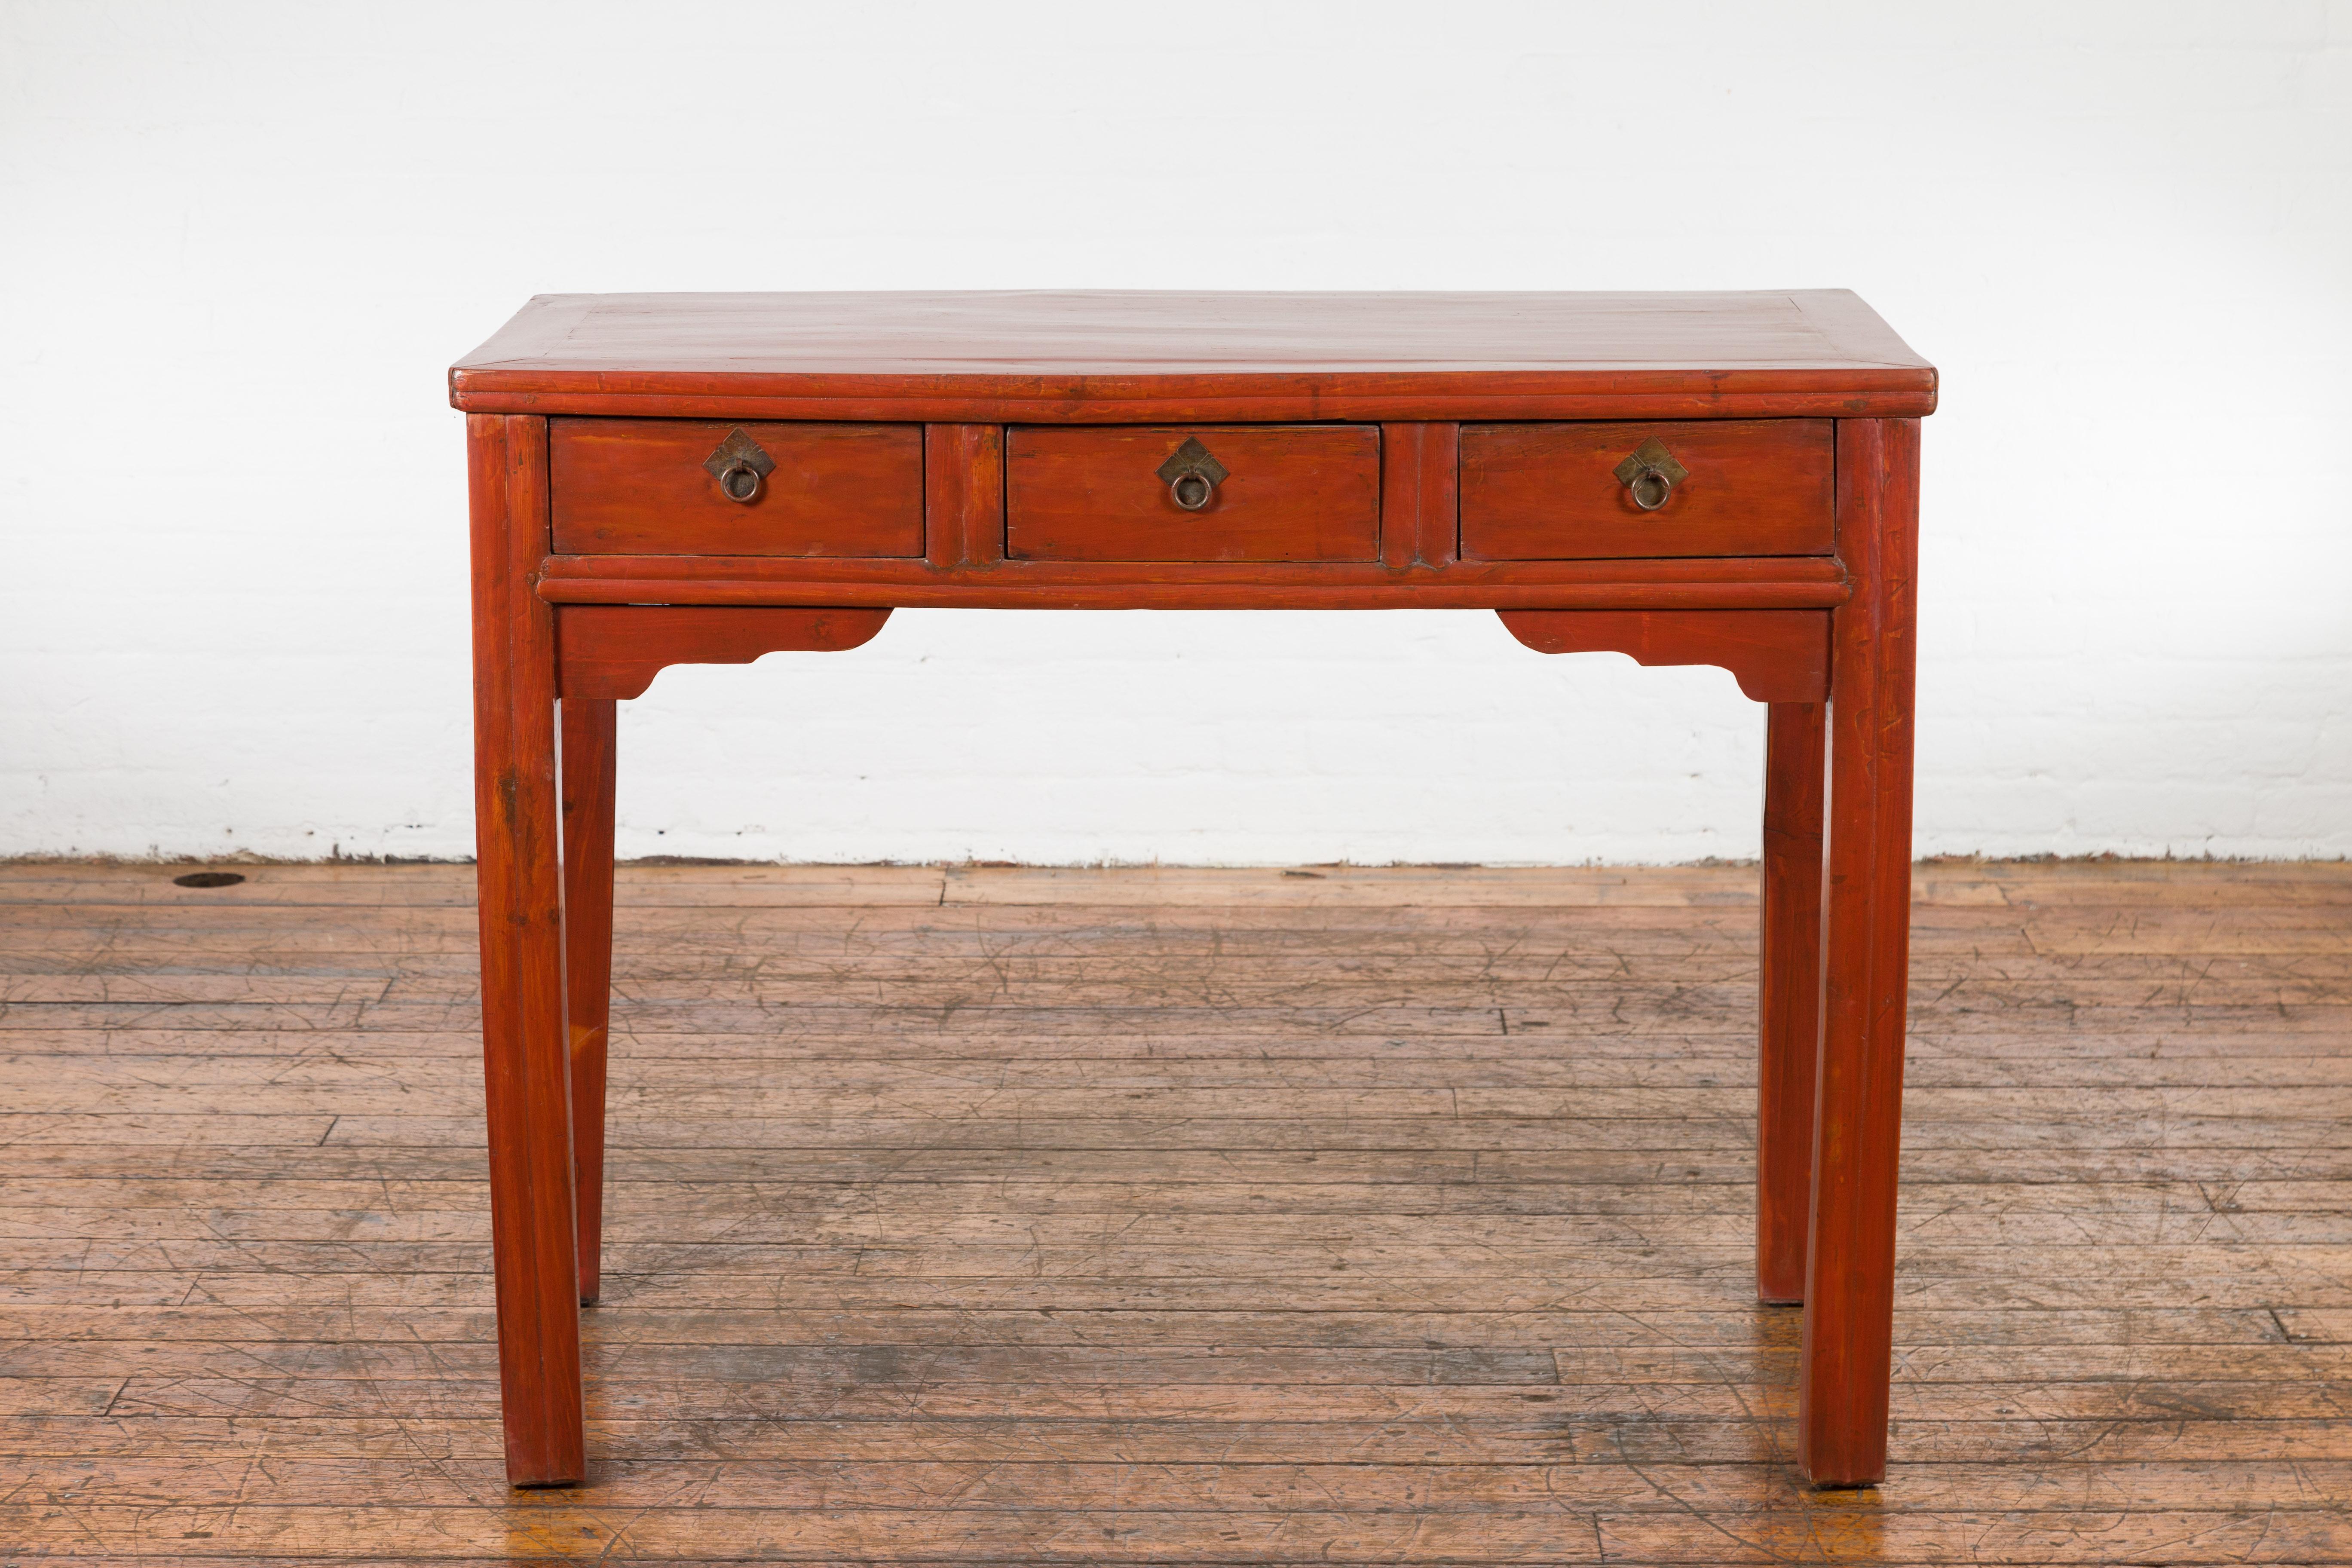 A Chinese Qing Dynasty period table from the 19th century with reddish orange lacquer, three drawers, carved spandrels and brass hardware. Created in China during the Qing Dynasty period in the 19th century, this lacquered table could be used as a